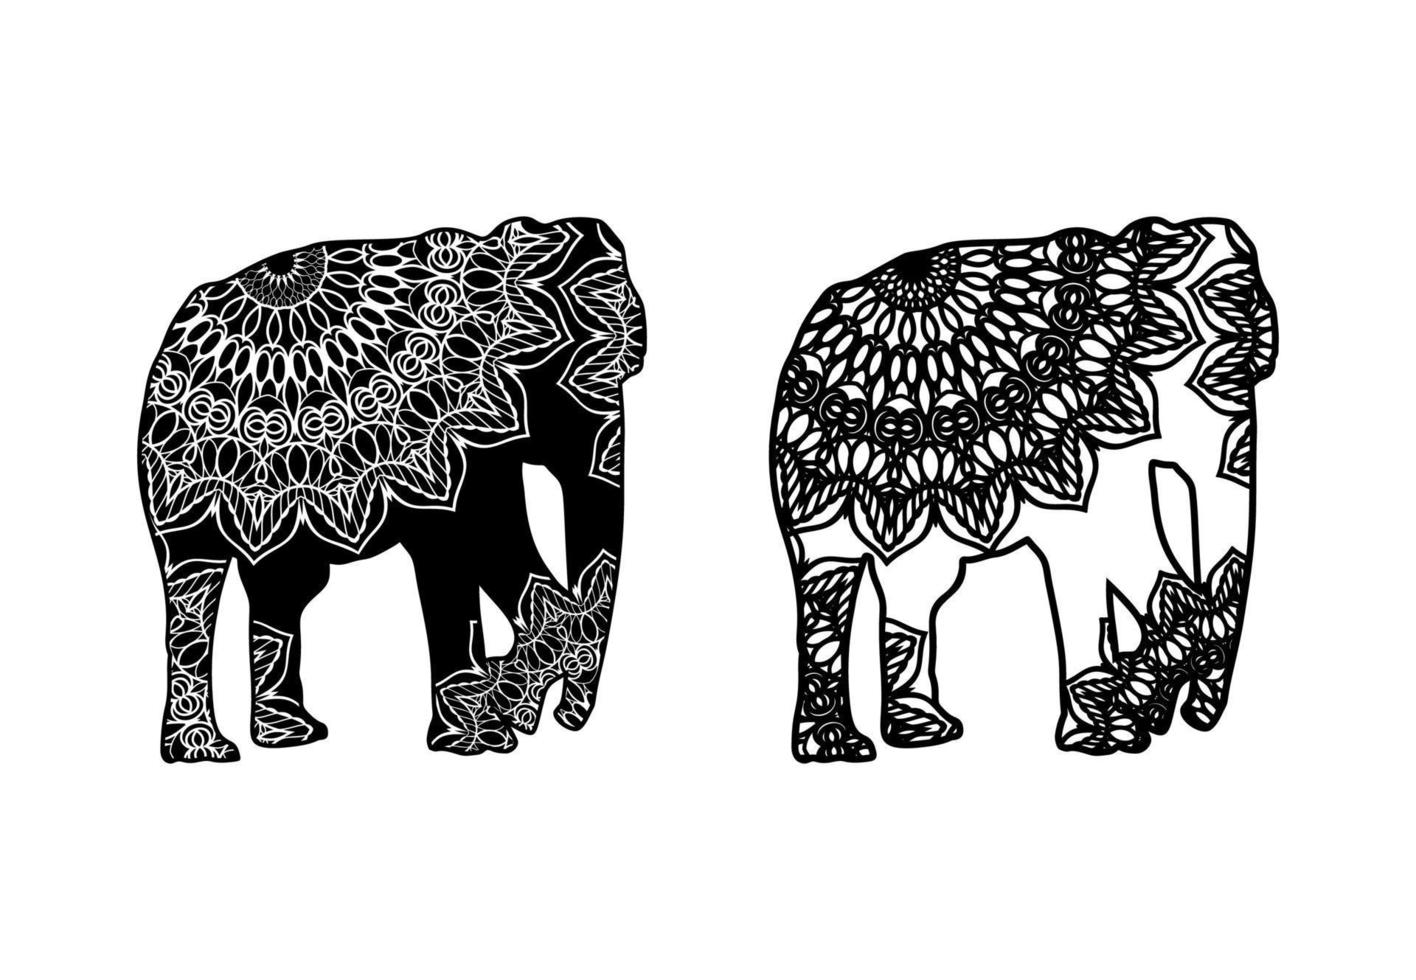 Elephant mandalas.Vintage vector illustration for decorative design. T shirt  print. Tribal ethnic texture. Indian style. As template of tattoo. Zentangle